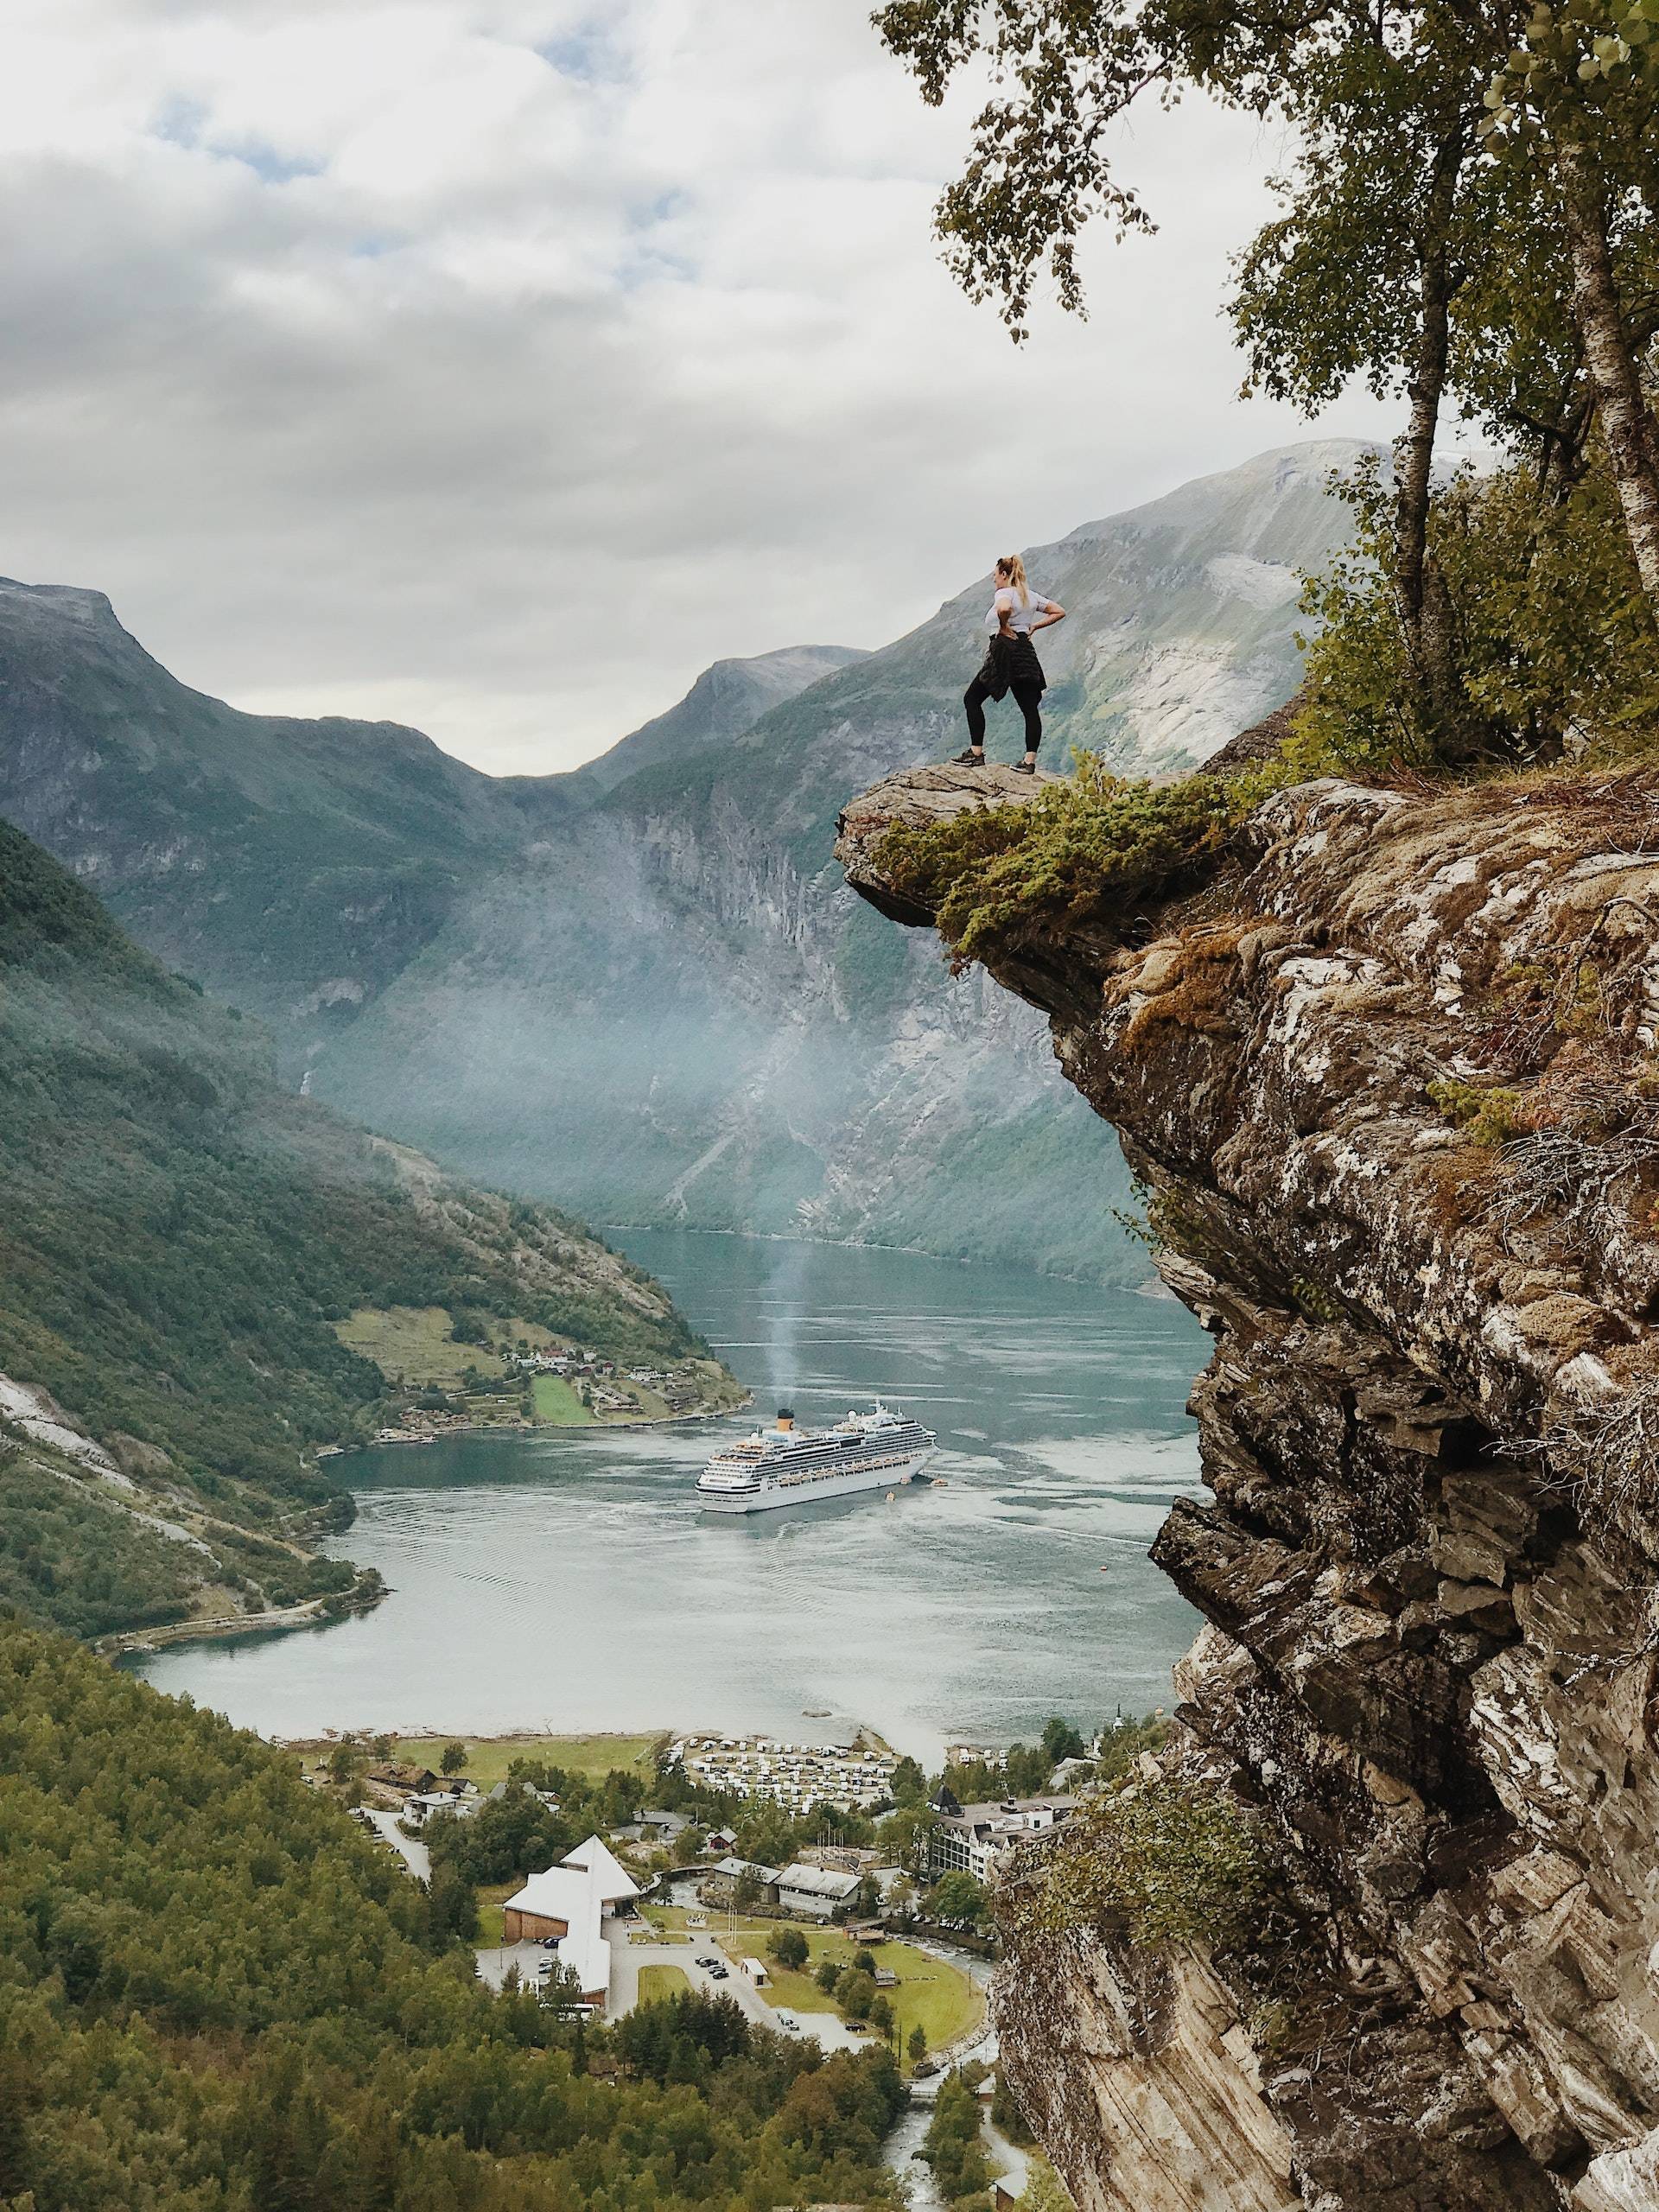 Person standing on a rock ledge overlooking a valley with a town below